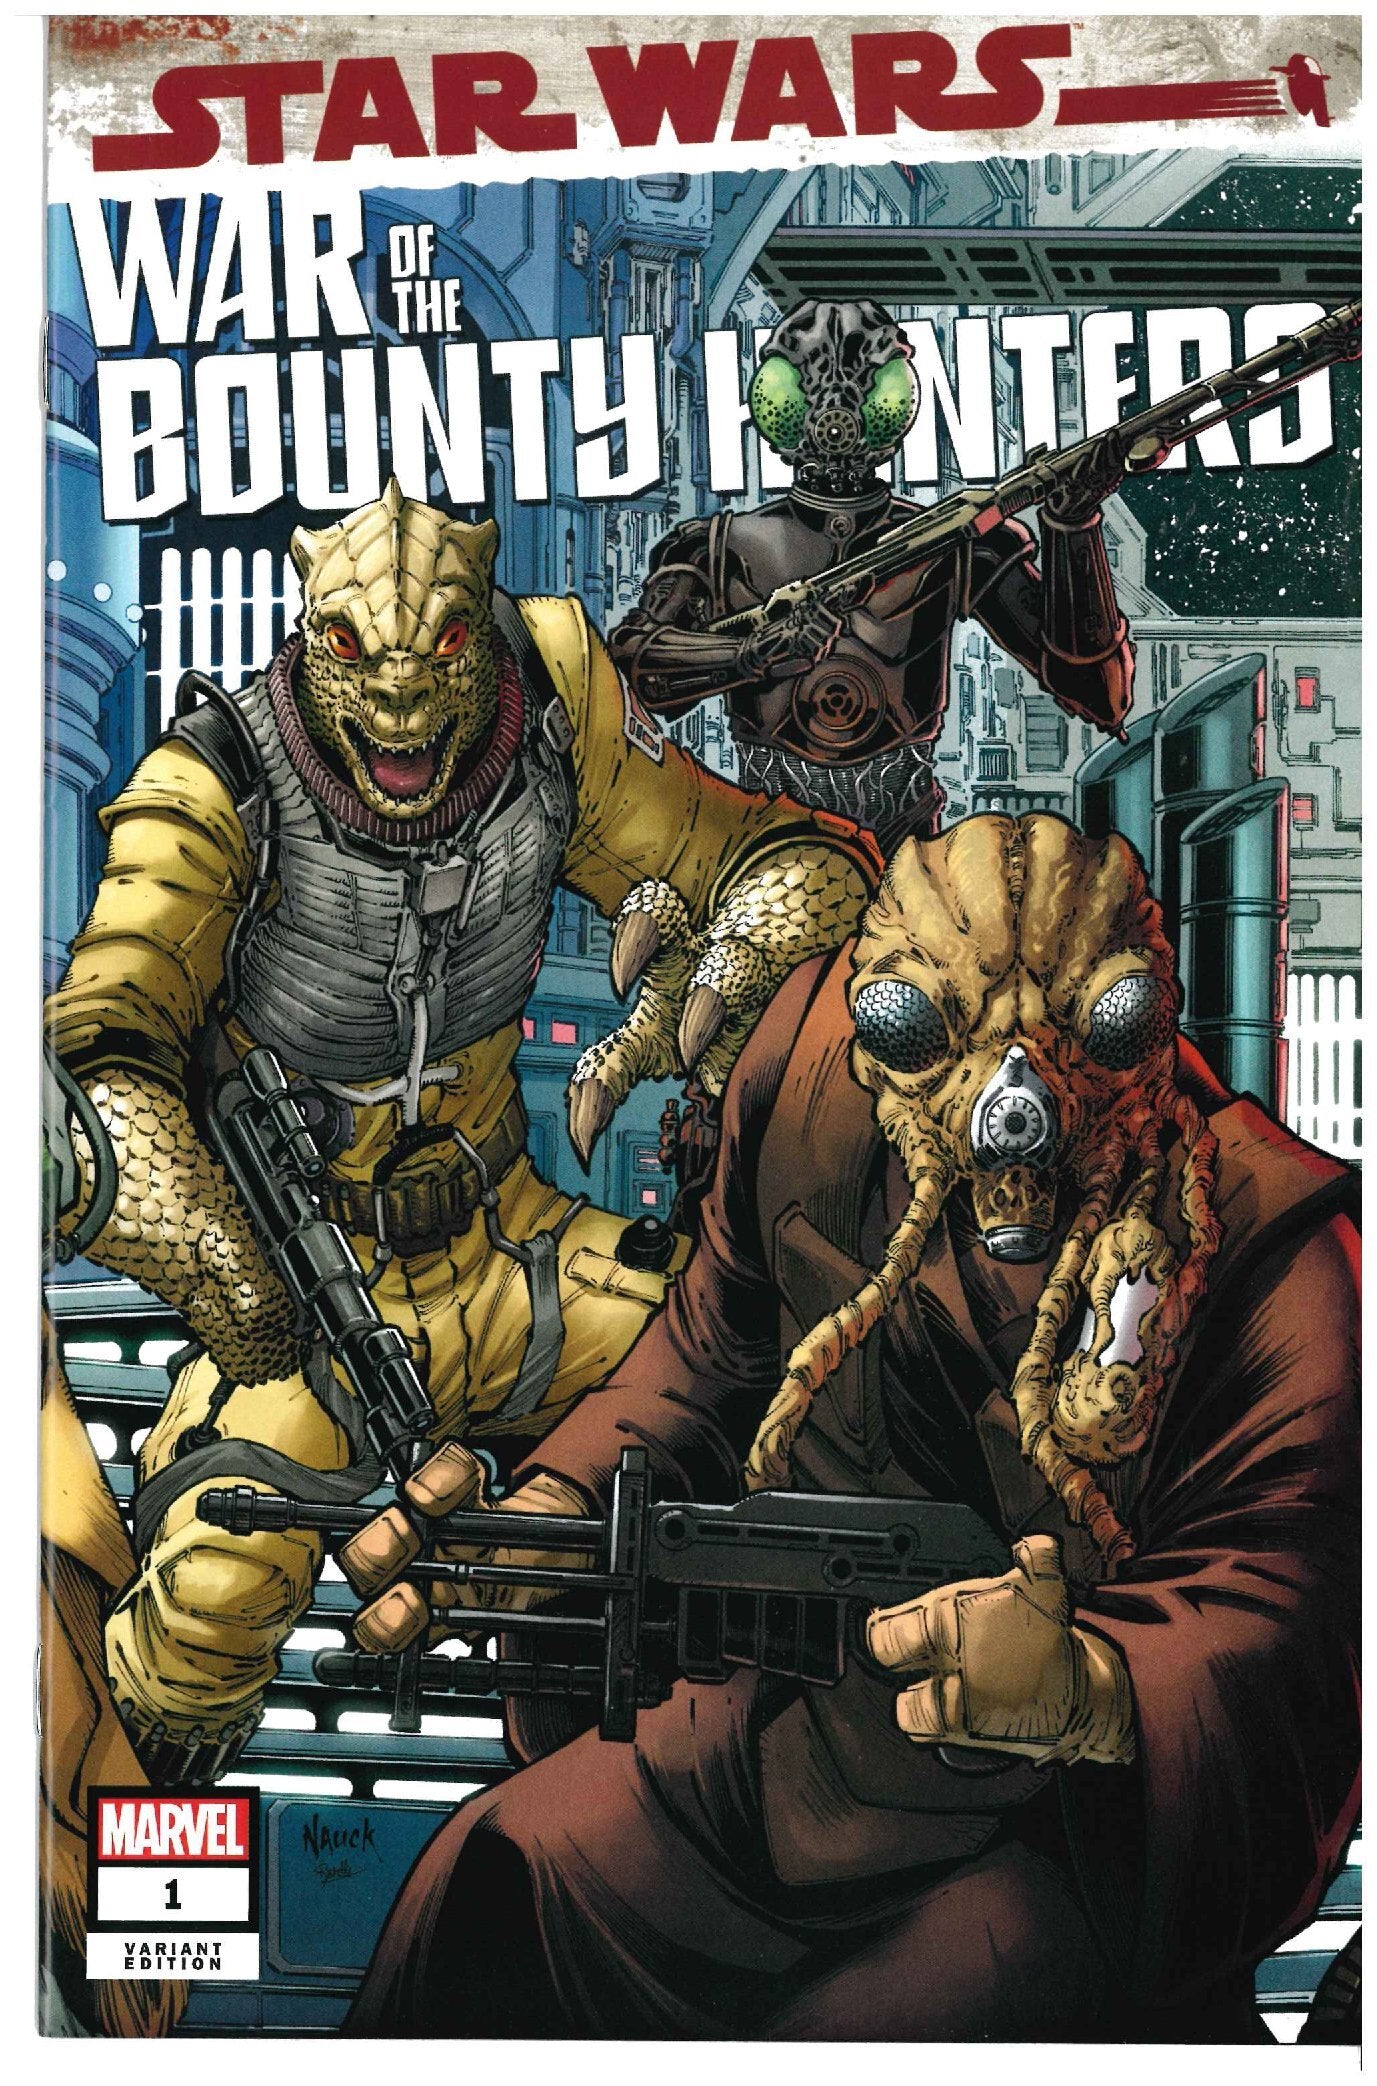 Star Wars: War of the Bounty Hunters #1 Retailer Exclusive Trade Dress Variant 